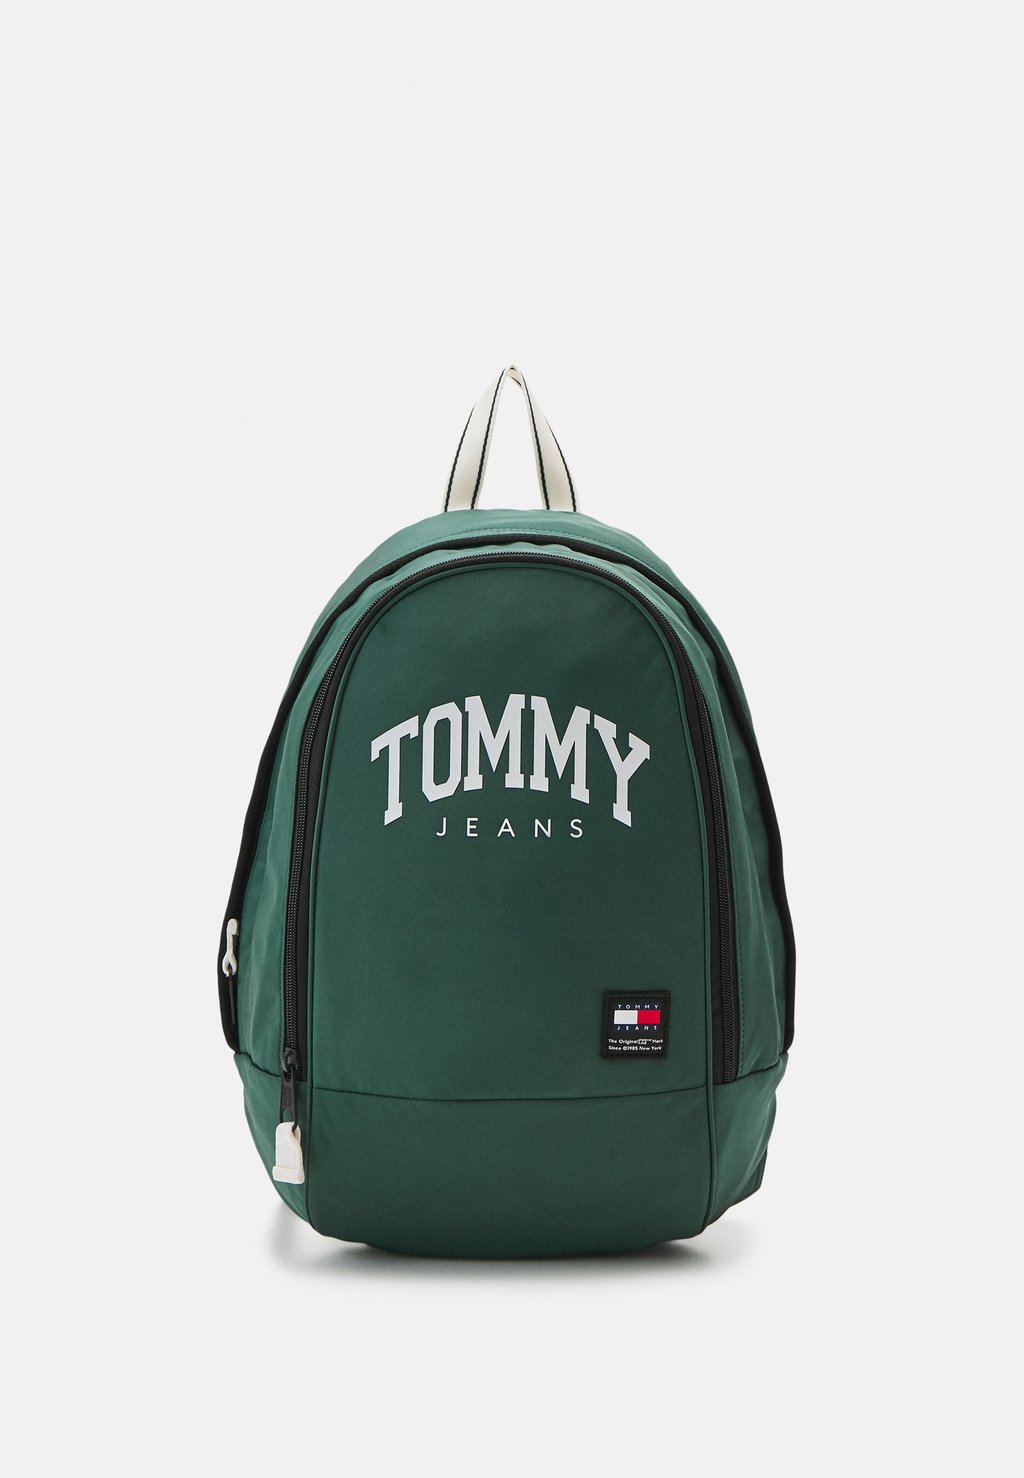 Рюкзак PREP SPORT BACKPACK UNISEX Tommy Jeans, цвет tahoe forest